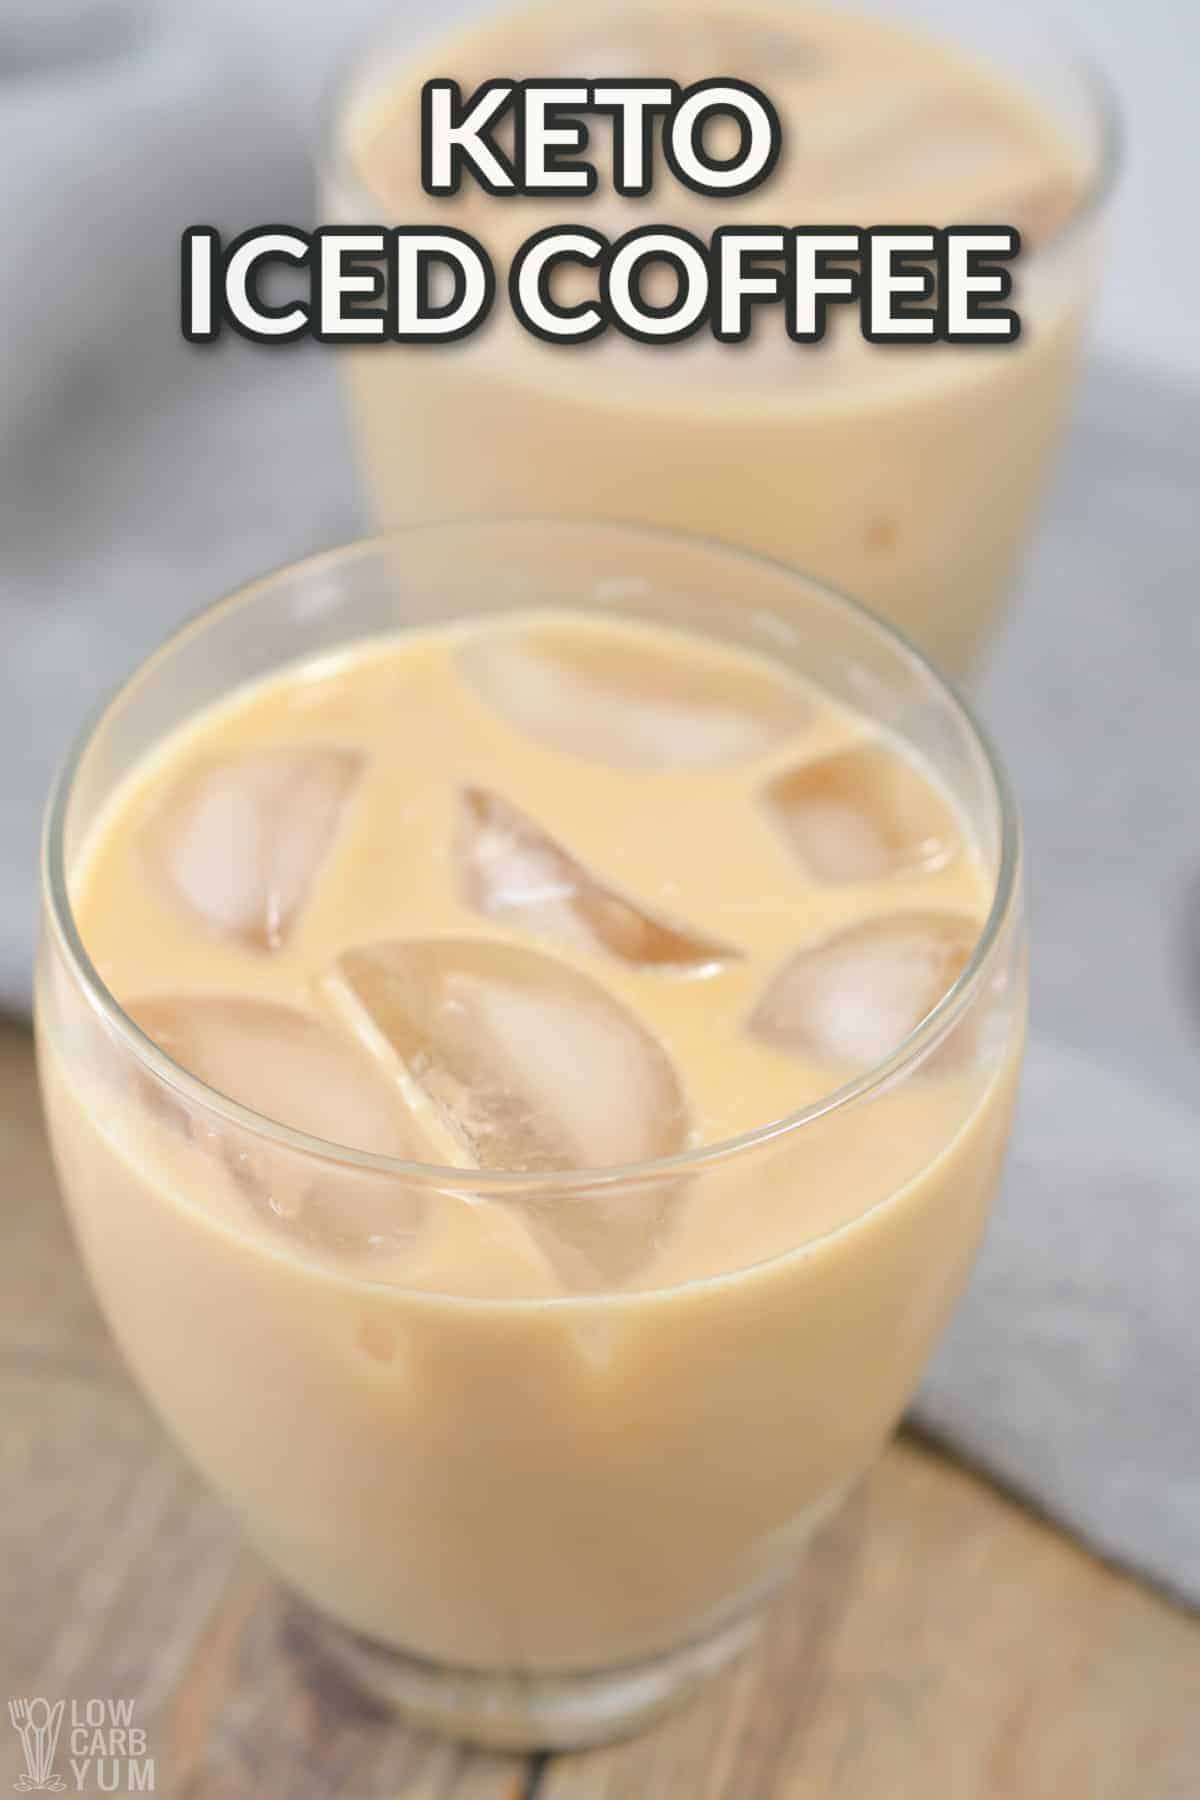 keto iced coffee with text overlay.